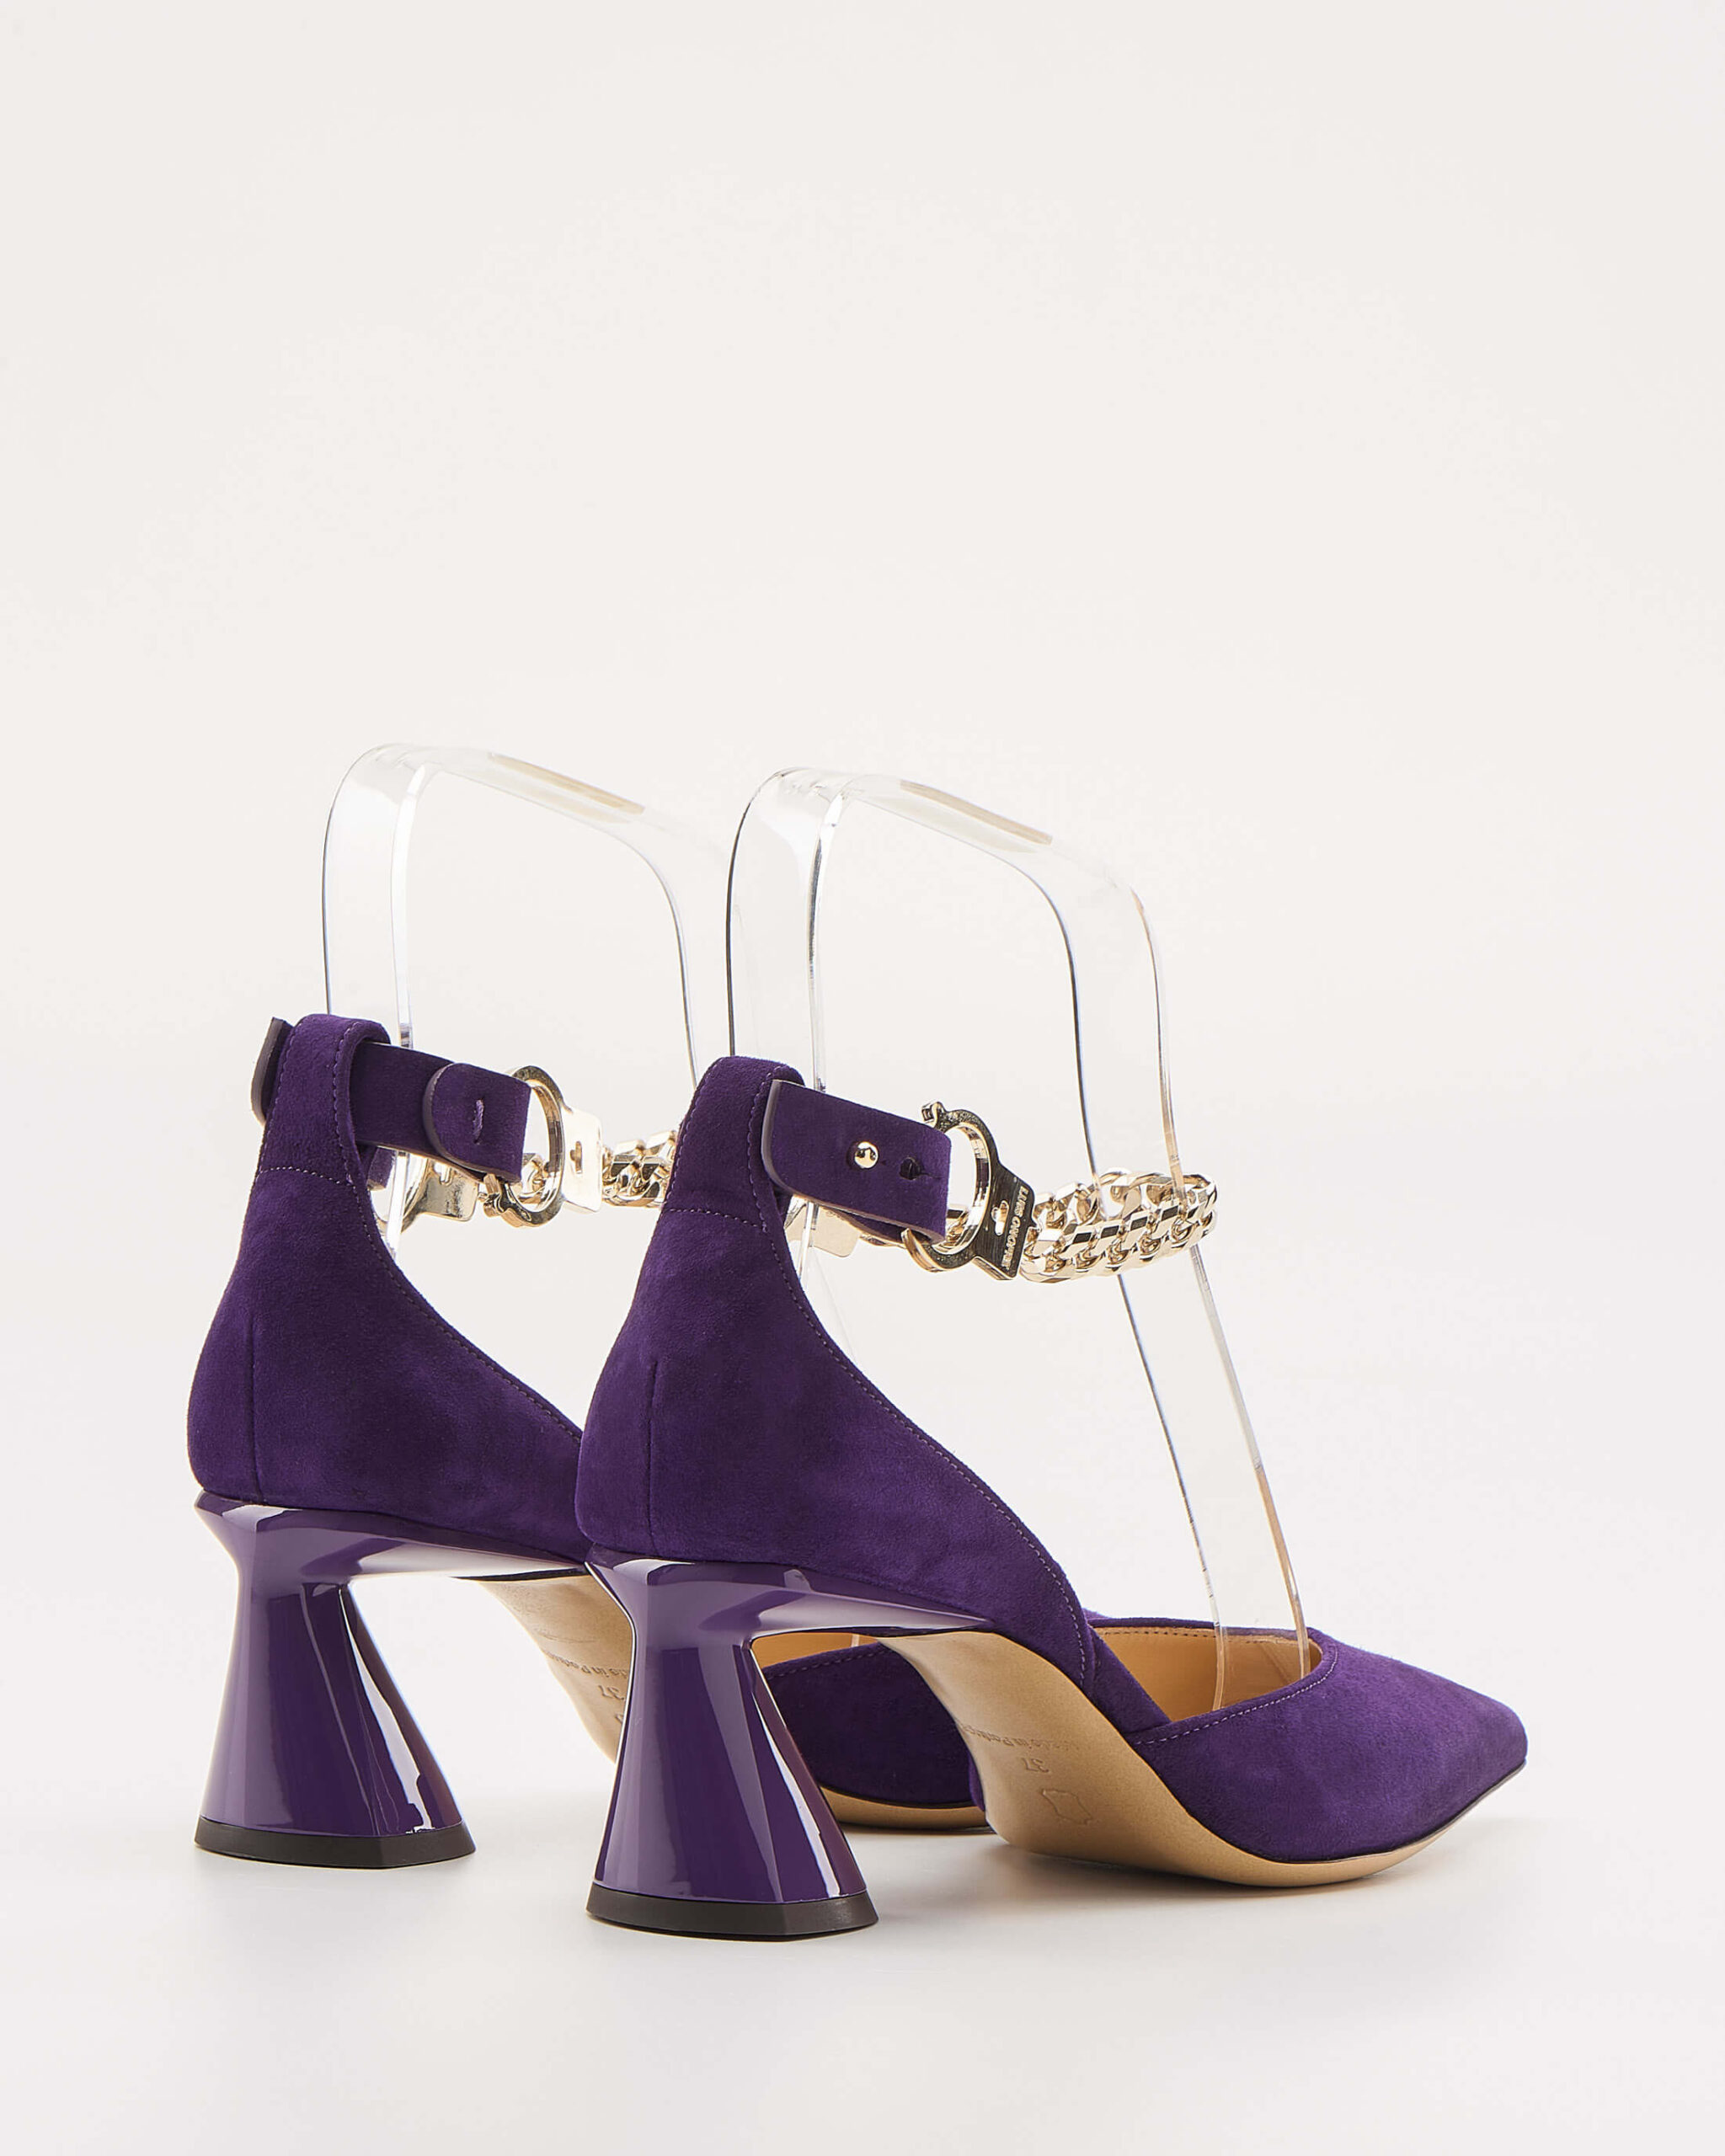 Luis Onofre Portuguese Shoes FW23 – Enigma Collection – 5492_02 – RIDDLE Purple-3